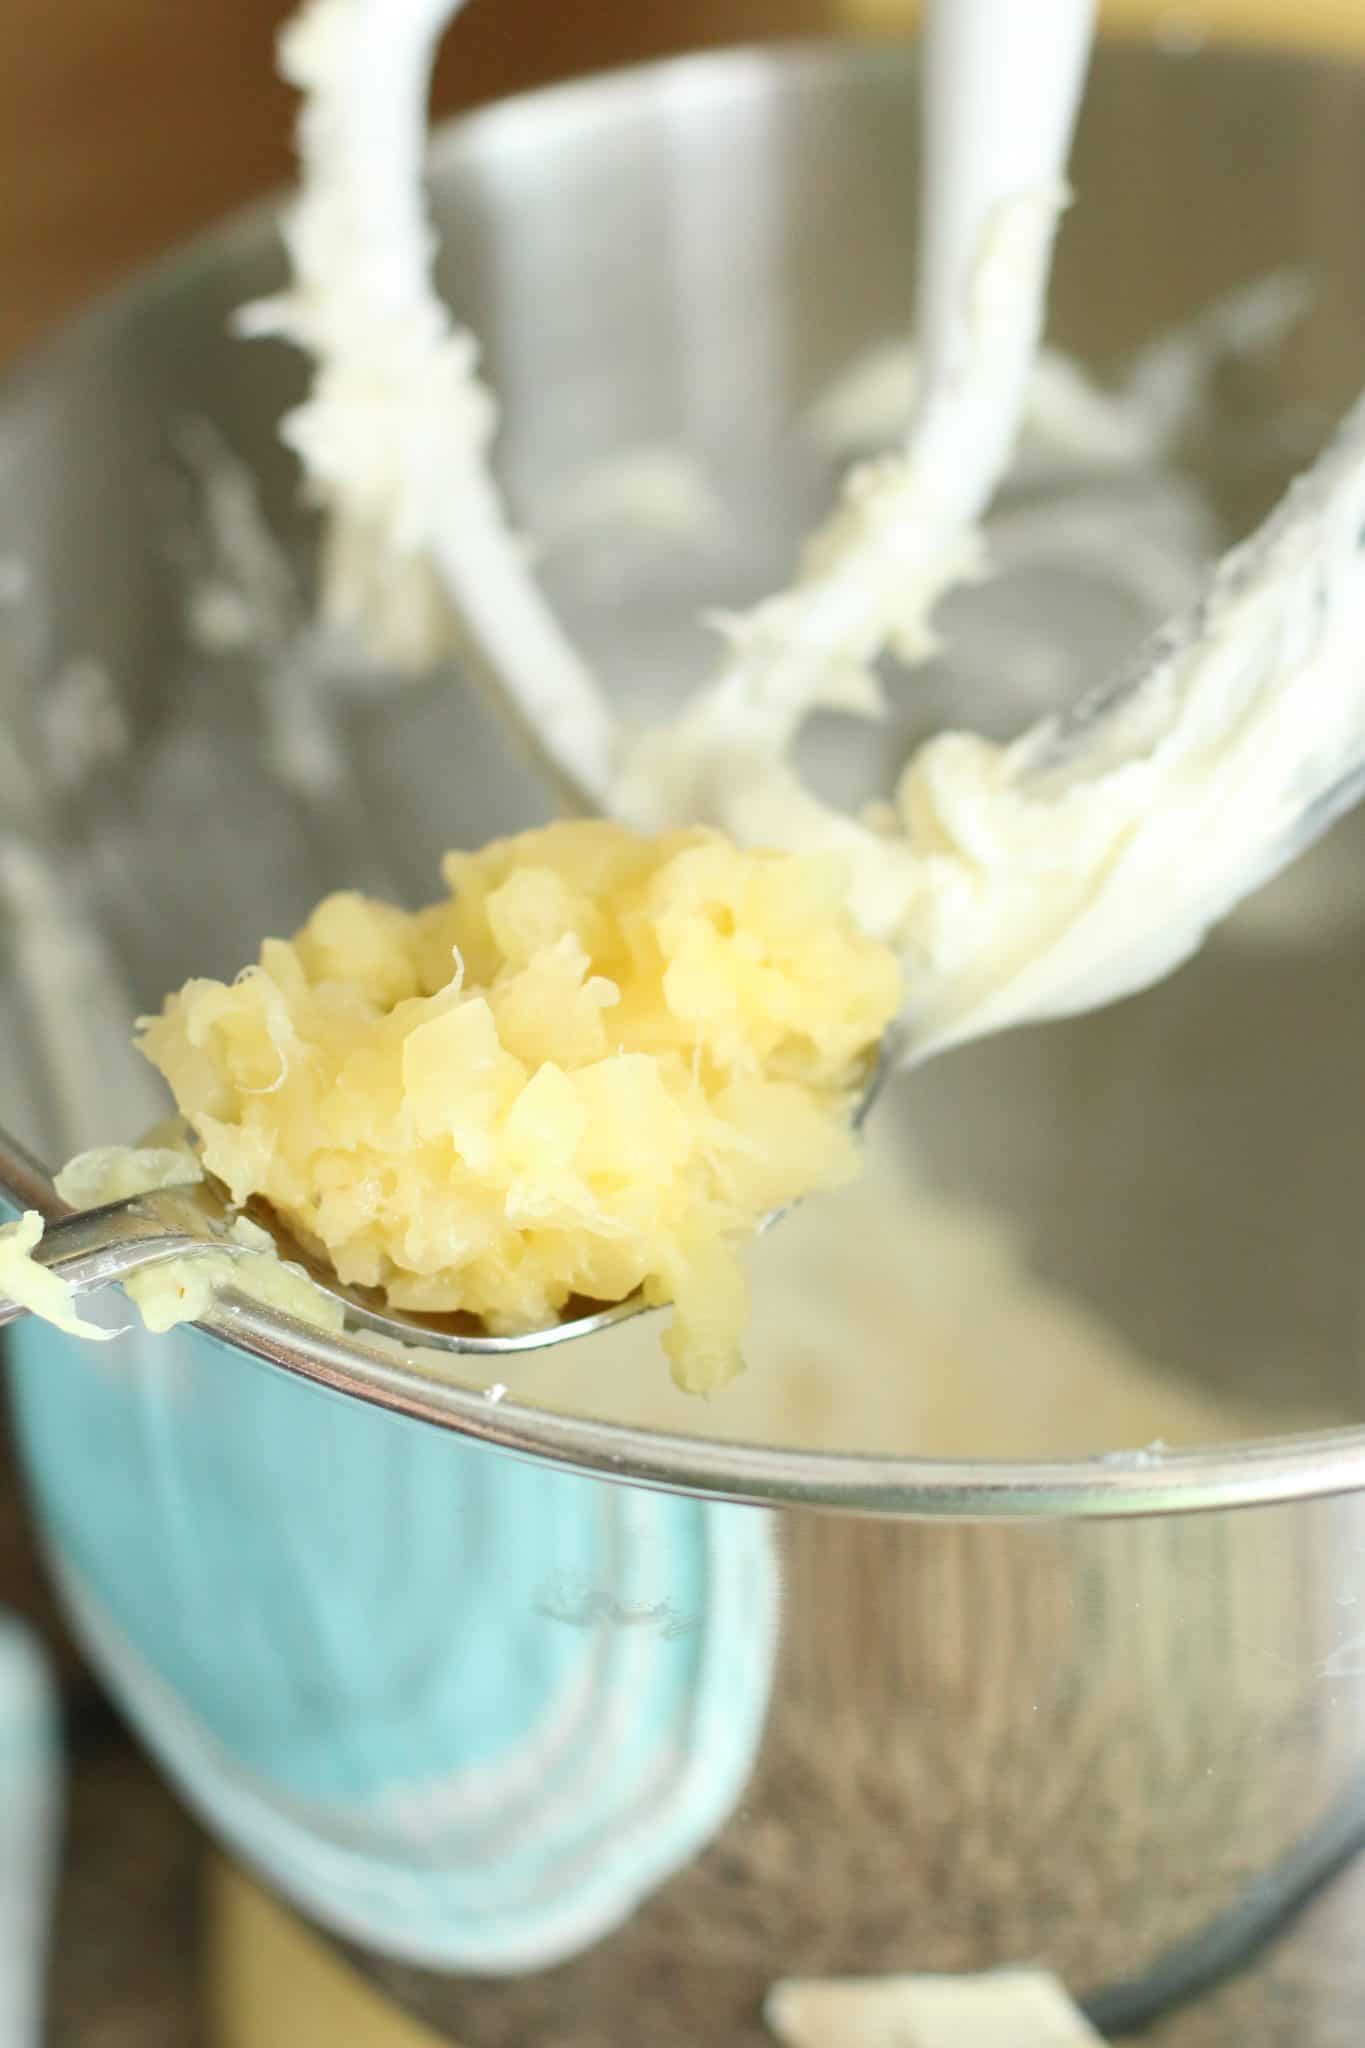 crushed pineapple added to cream cheese mixture in a mixing bowl